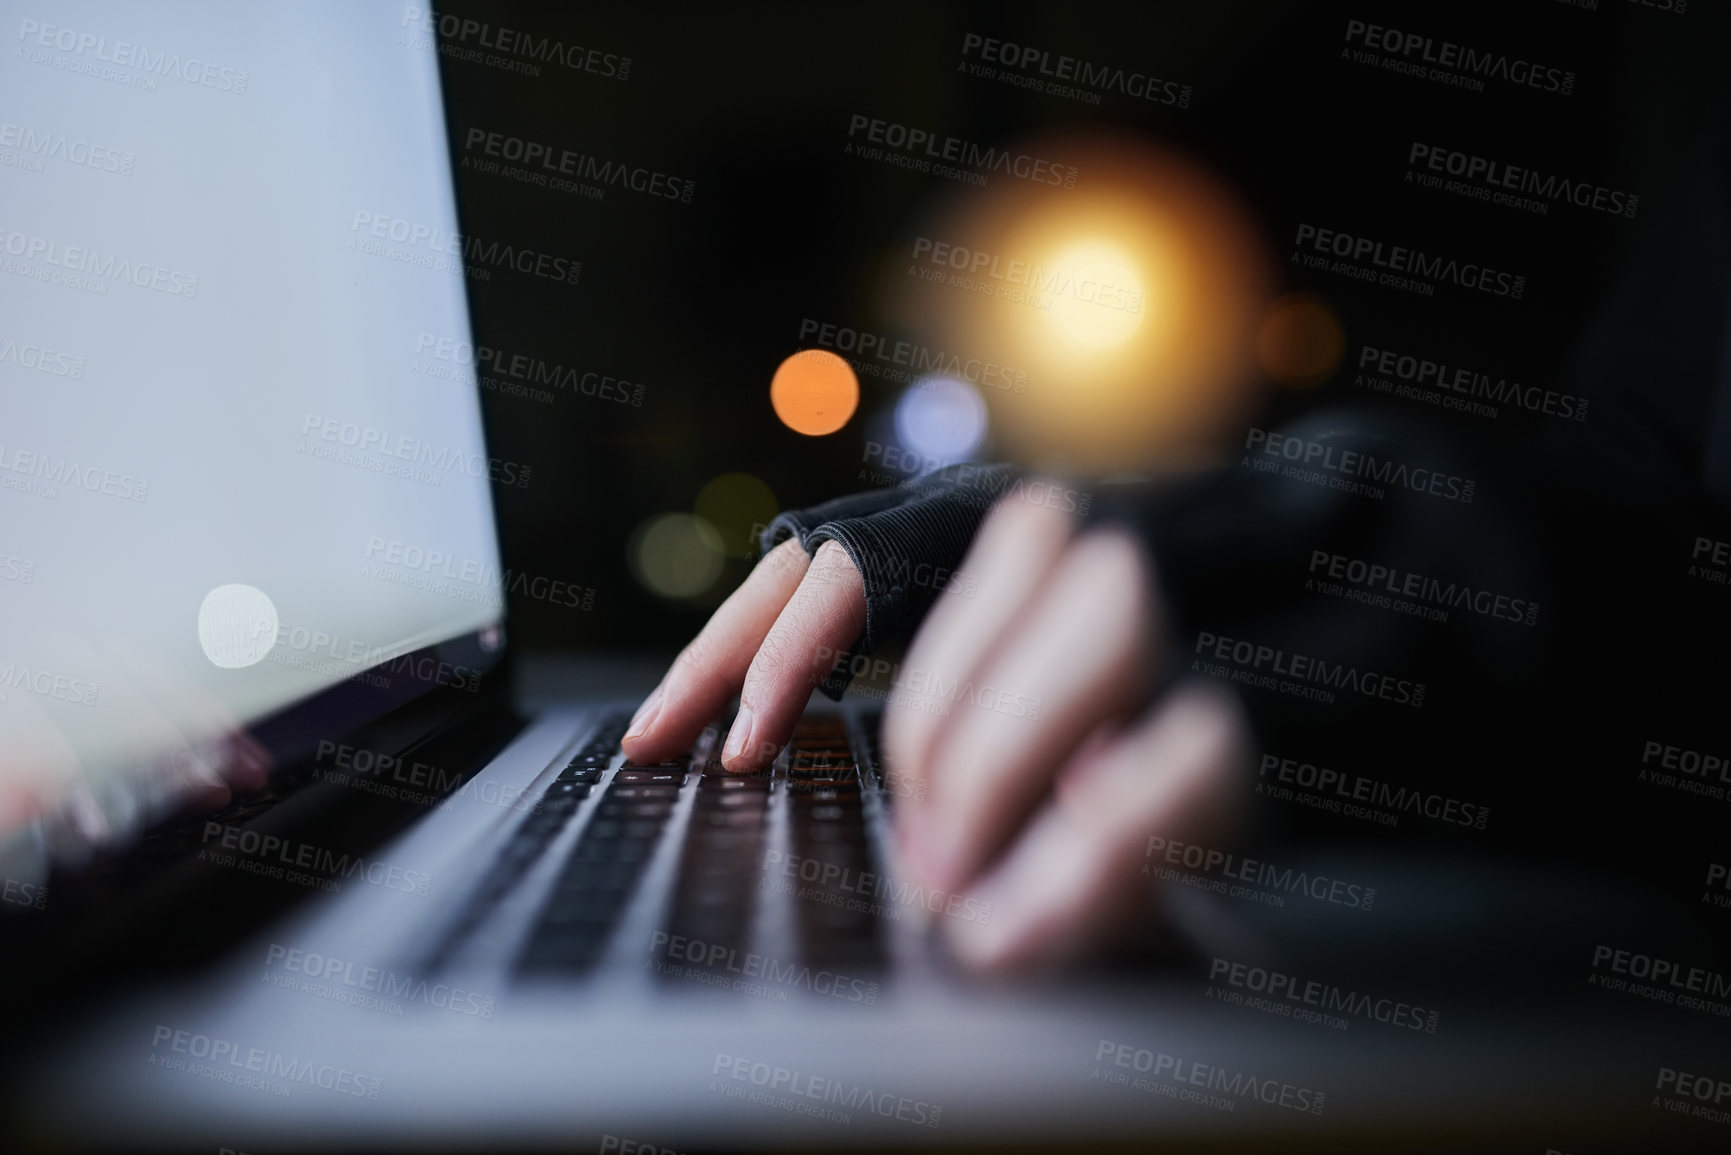 Buy stock photo Shot of an unrecognizable computer hacker using a laptop late at night